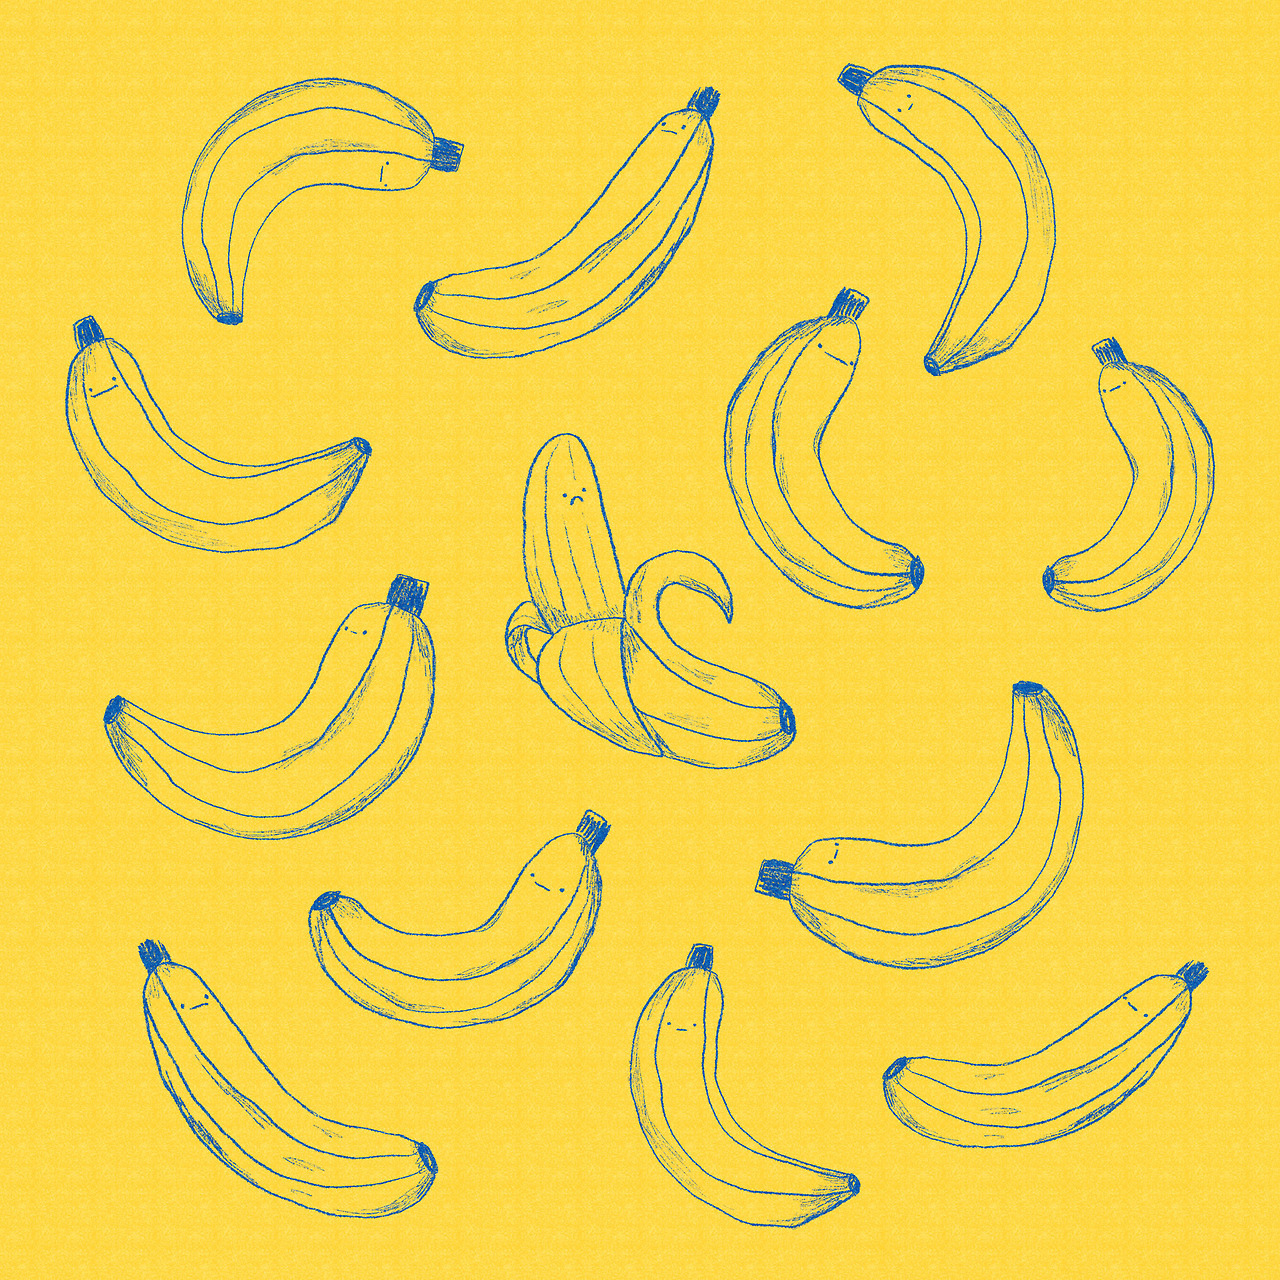 Bananas https://www.tesssmithroberts.co.uk/ https://www.instagram.com/tesssmithroberts/ — Immediately post your art to a topic and get feedback. Join our new community, EatSleepDraw Studio, today!